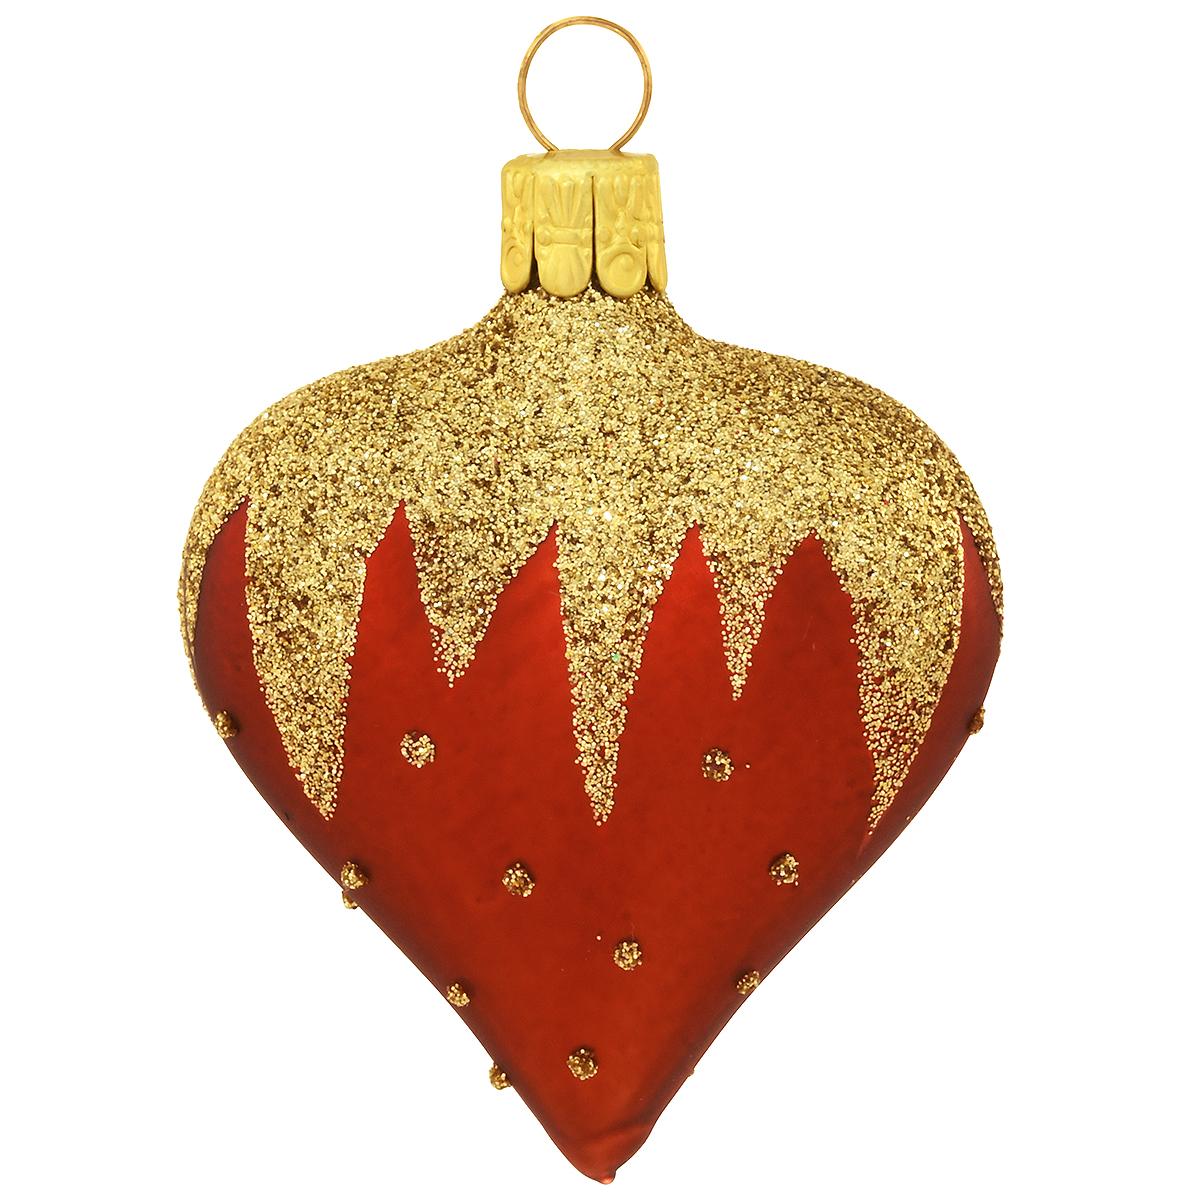 Heart With Gold Glitter Ornament